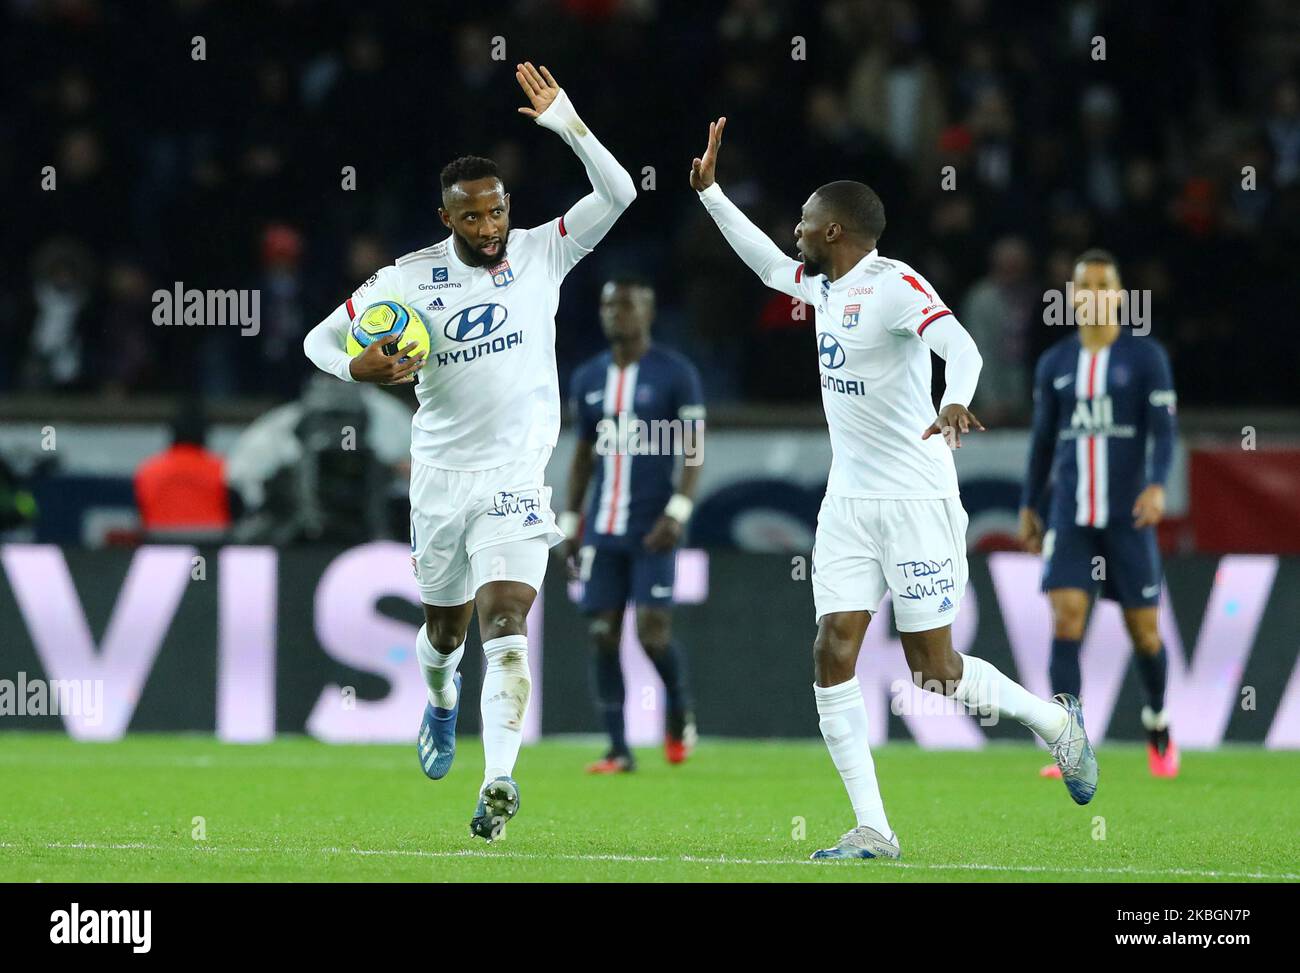 Moussa Dembele of OL celebrates with Karl Toko Ekambi after scoring the goal of 2-3 during the football Ligue 1 Conforama match Paris Saint-Germain v Olympique Lyonnais at the Parc des Princes in Paris, France on February 9, 2020 (Photo by Matteo Ciambelli/NurPhoto) Stock Photo